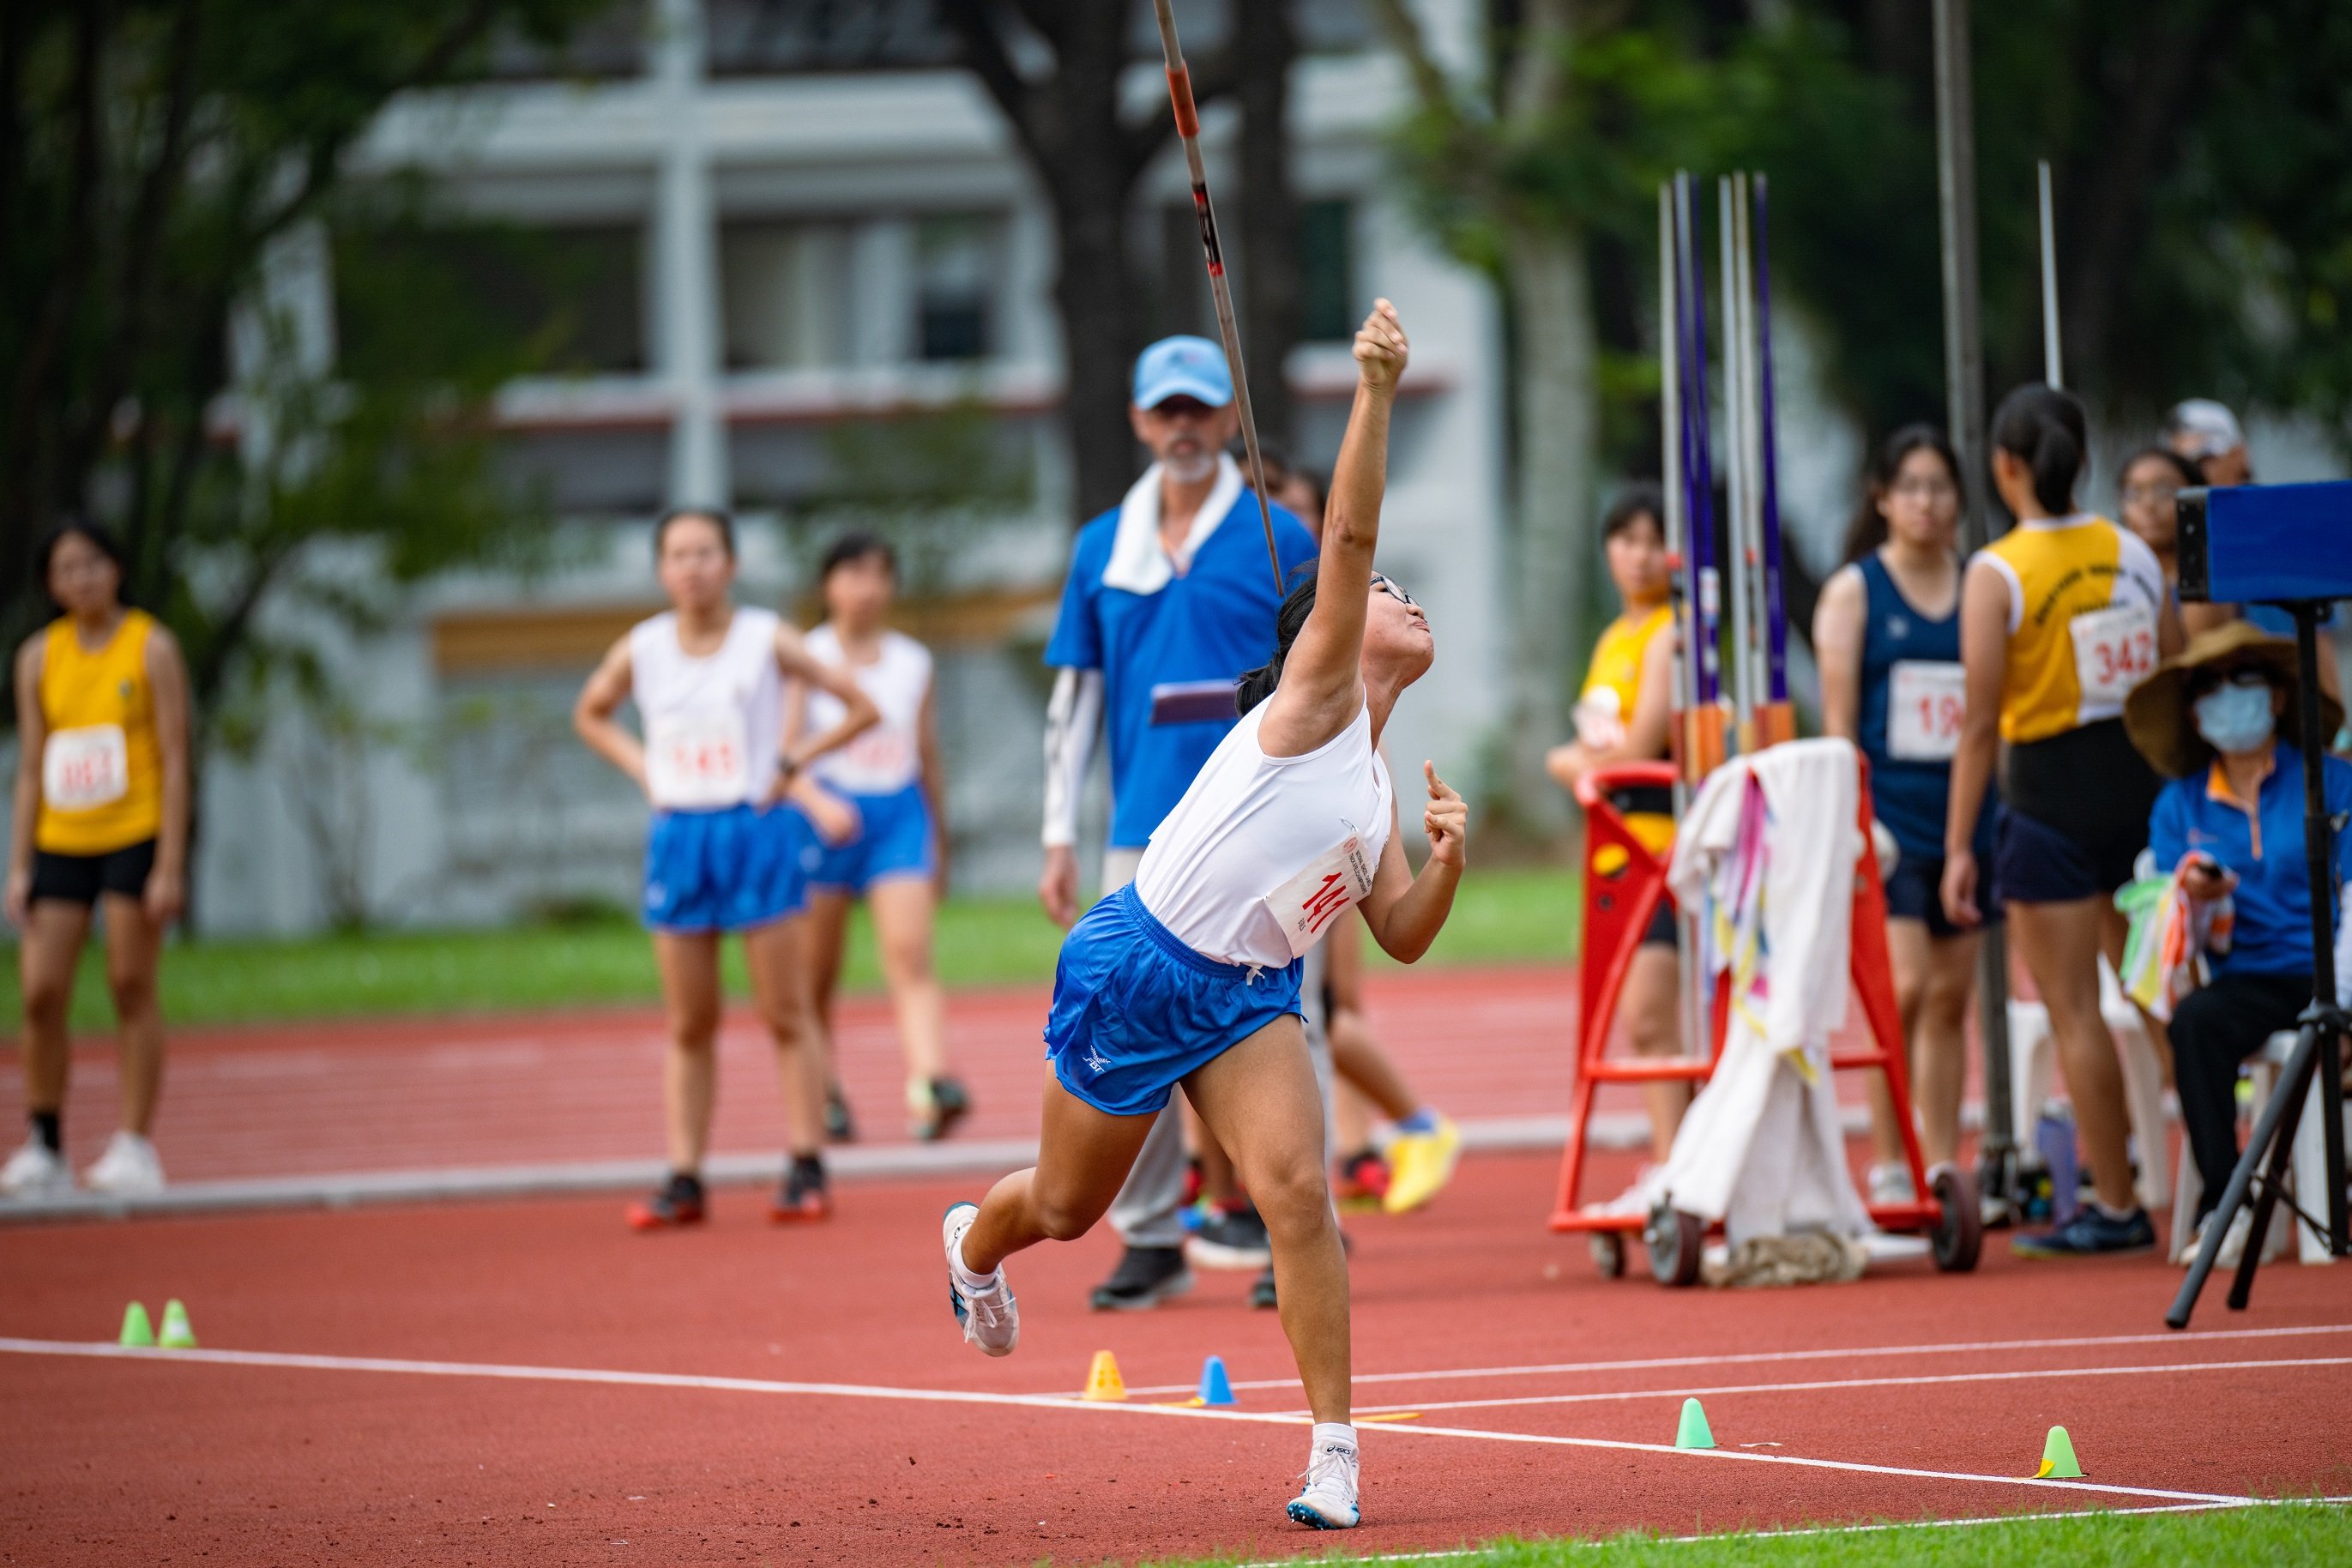 2023-04-14_National School Game T&F 2023 (PM)_Photo by Tom Ng Kok Leong_DSC_7091_B Girls Javelin Amelia Poppy Ee (tag 141) of SNG 2nd place 30.88m